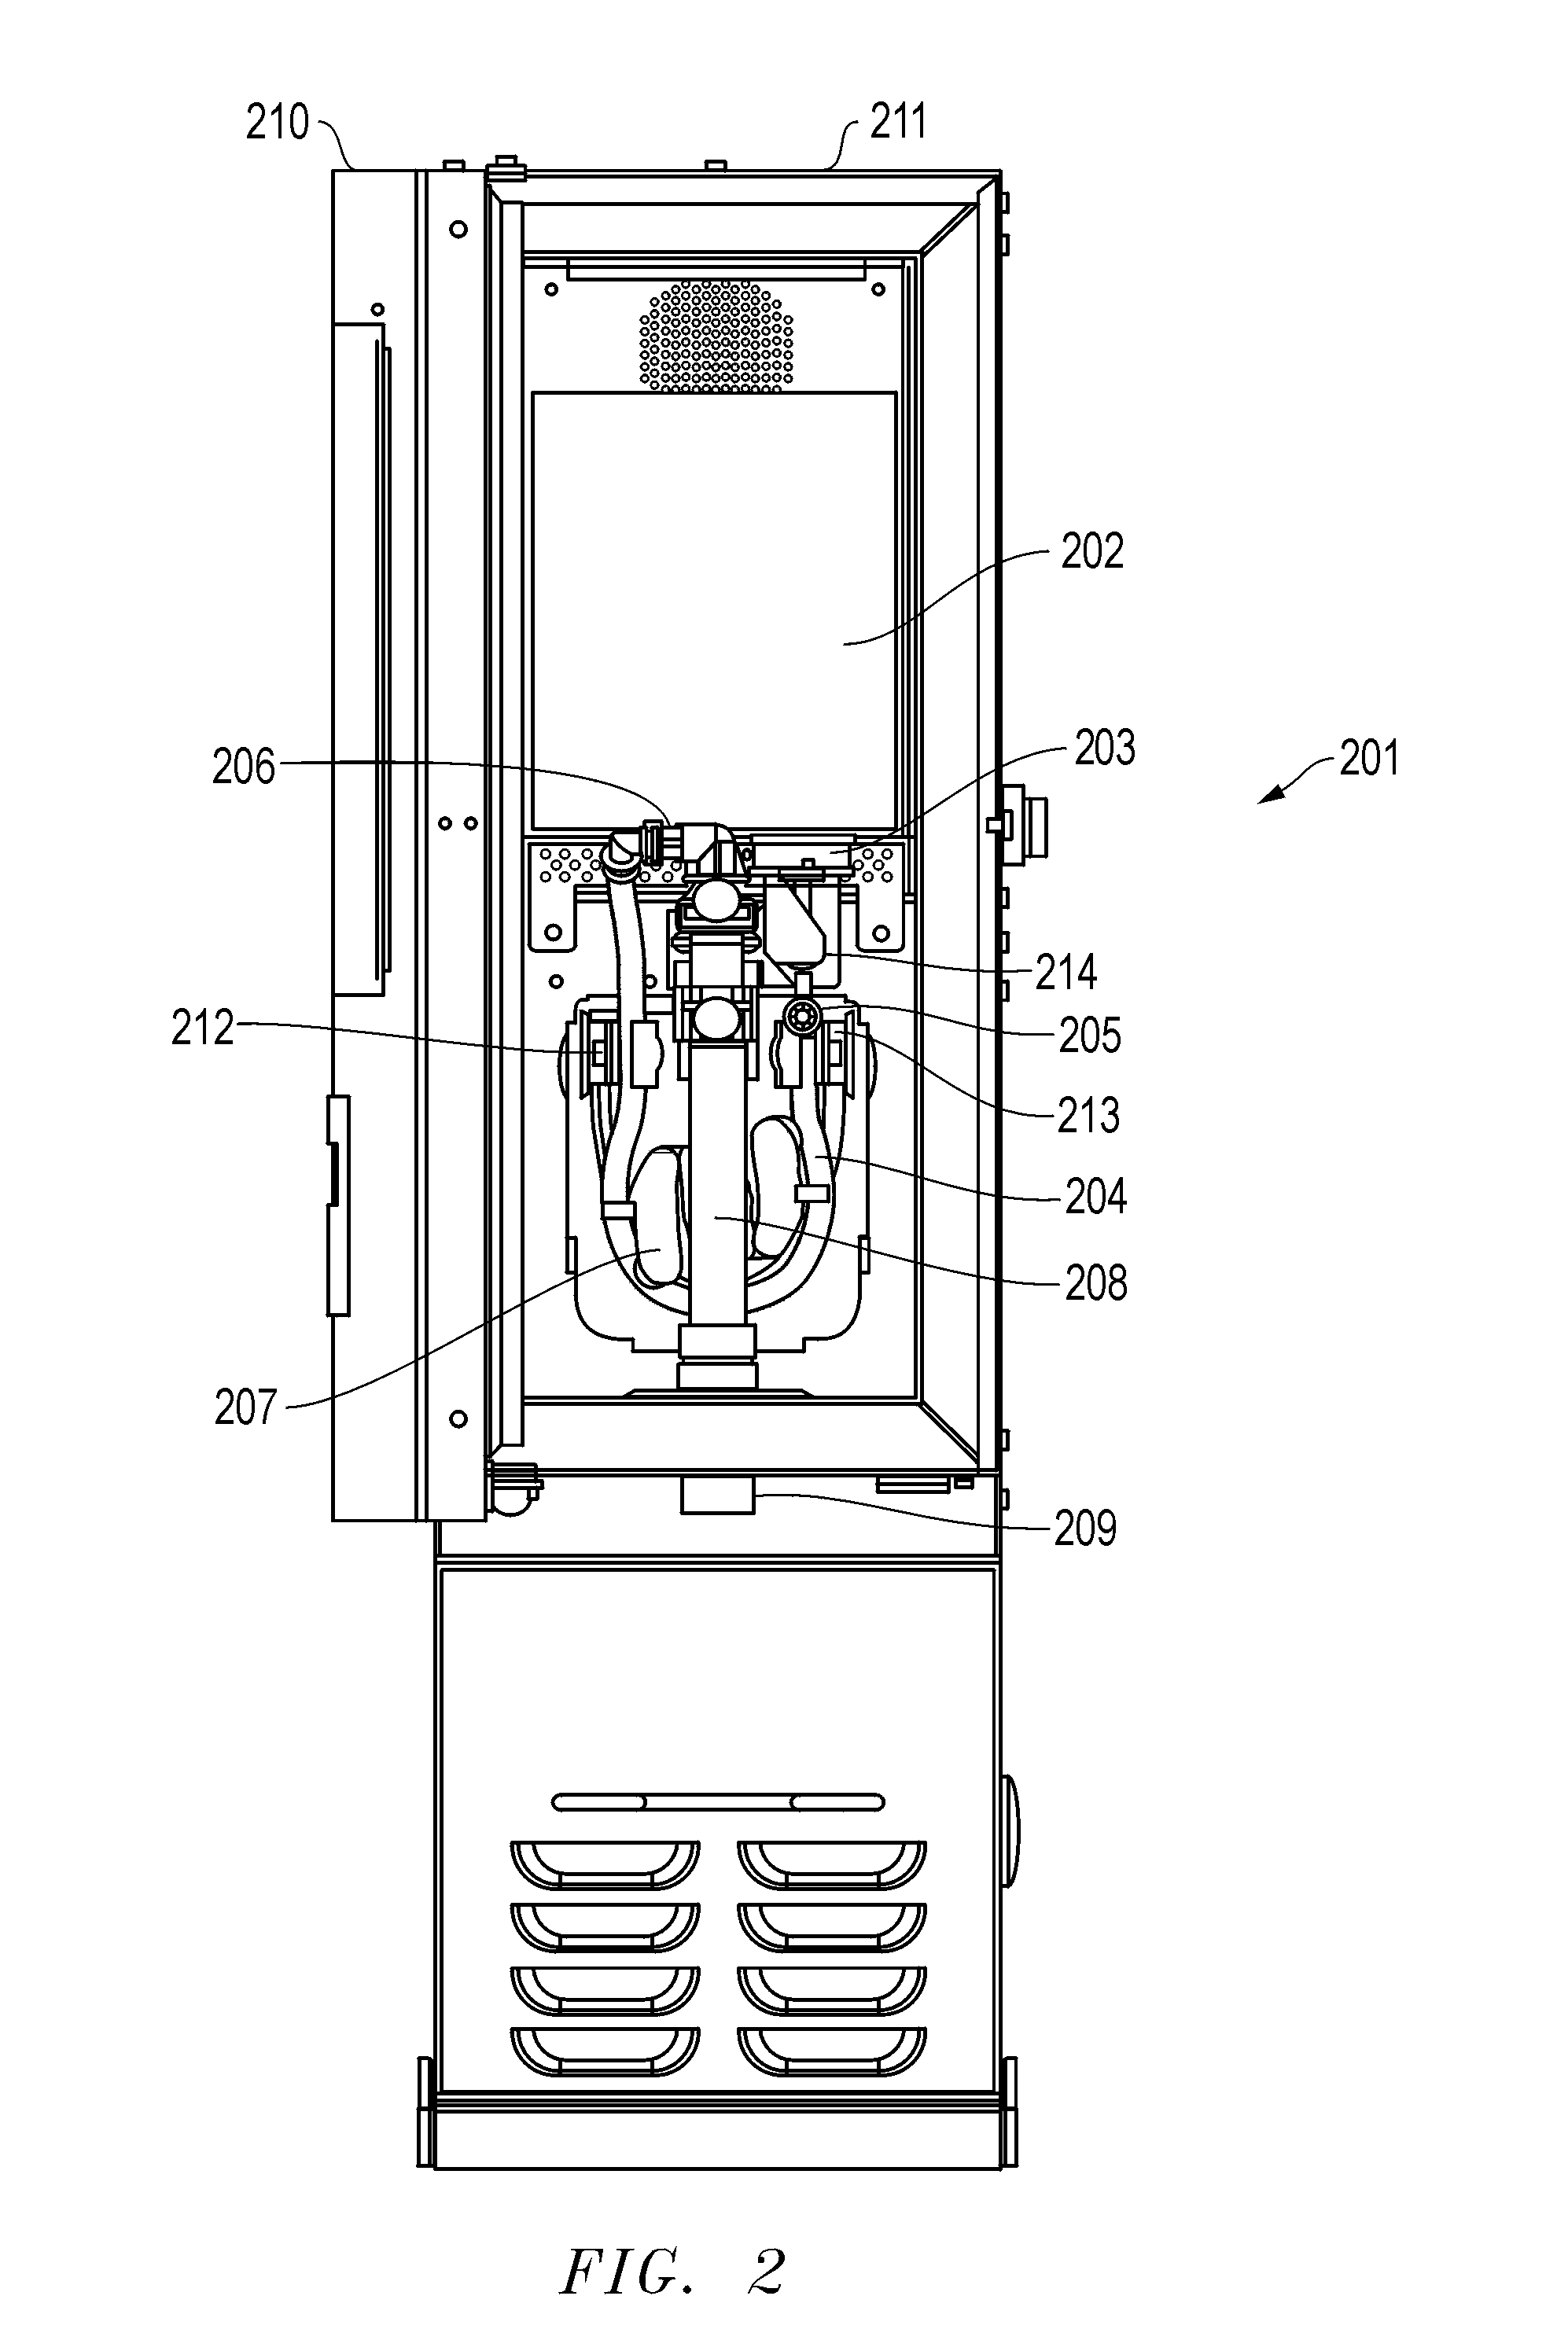 Method and System for Dispensing Whipped Toppings